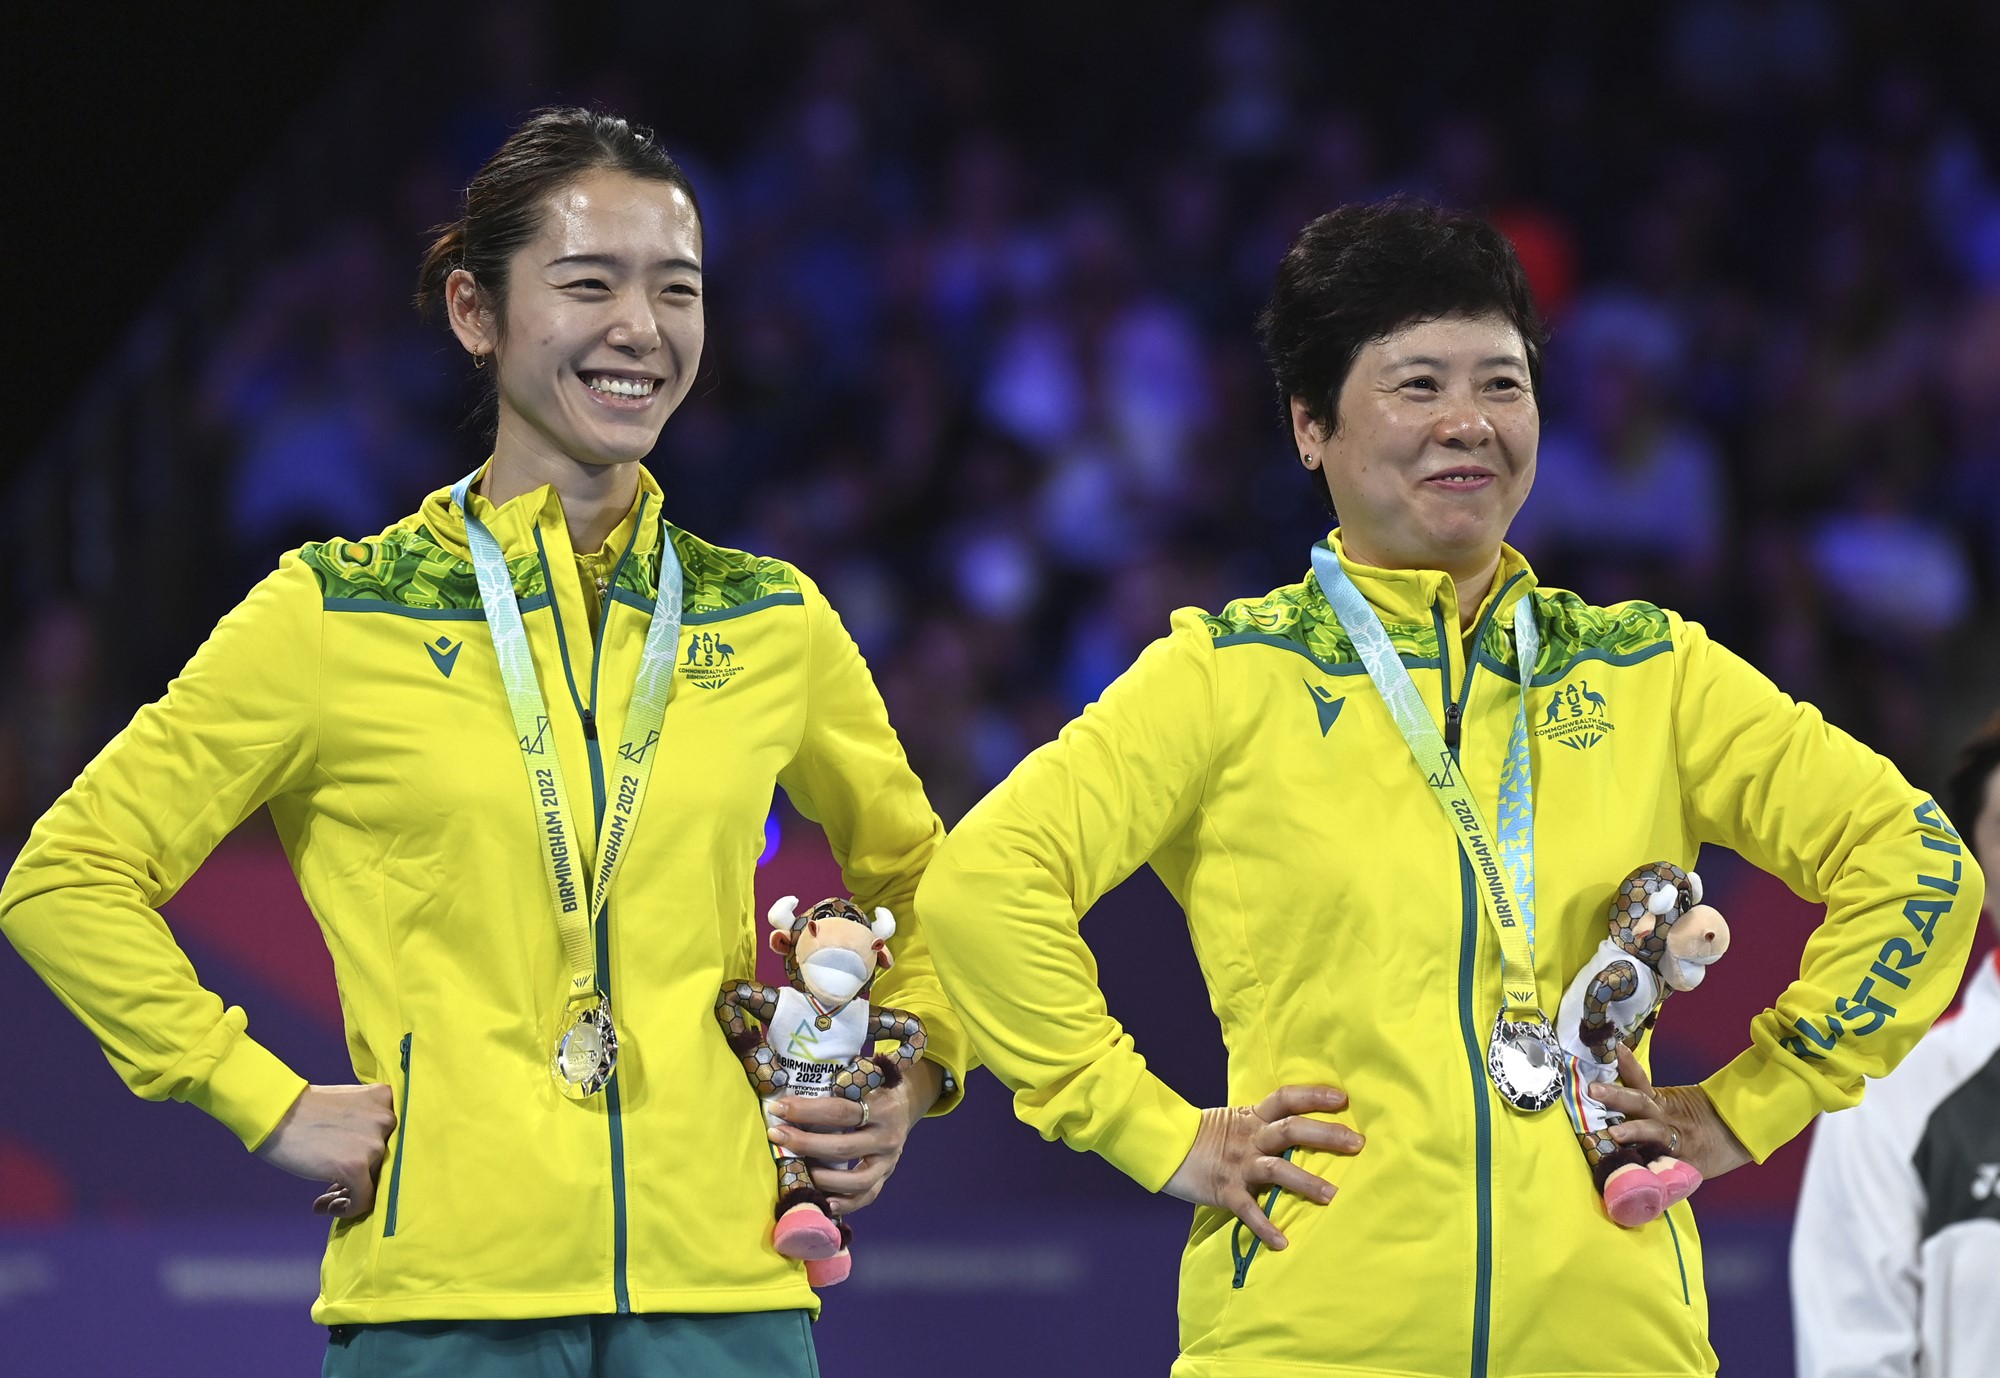 Table tennis players Jian Fang Lay and Minhyung Jee smile with hands on hips on the podium at the Commonwealth Games.